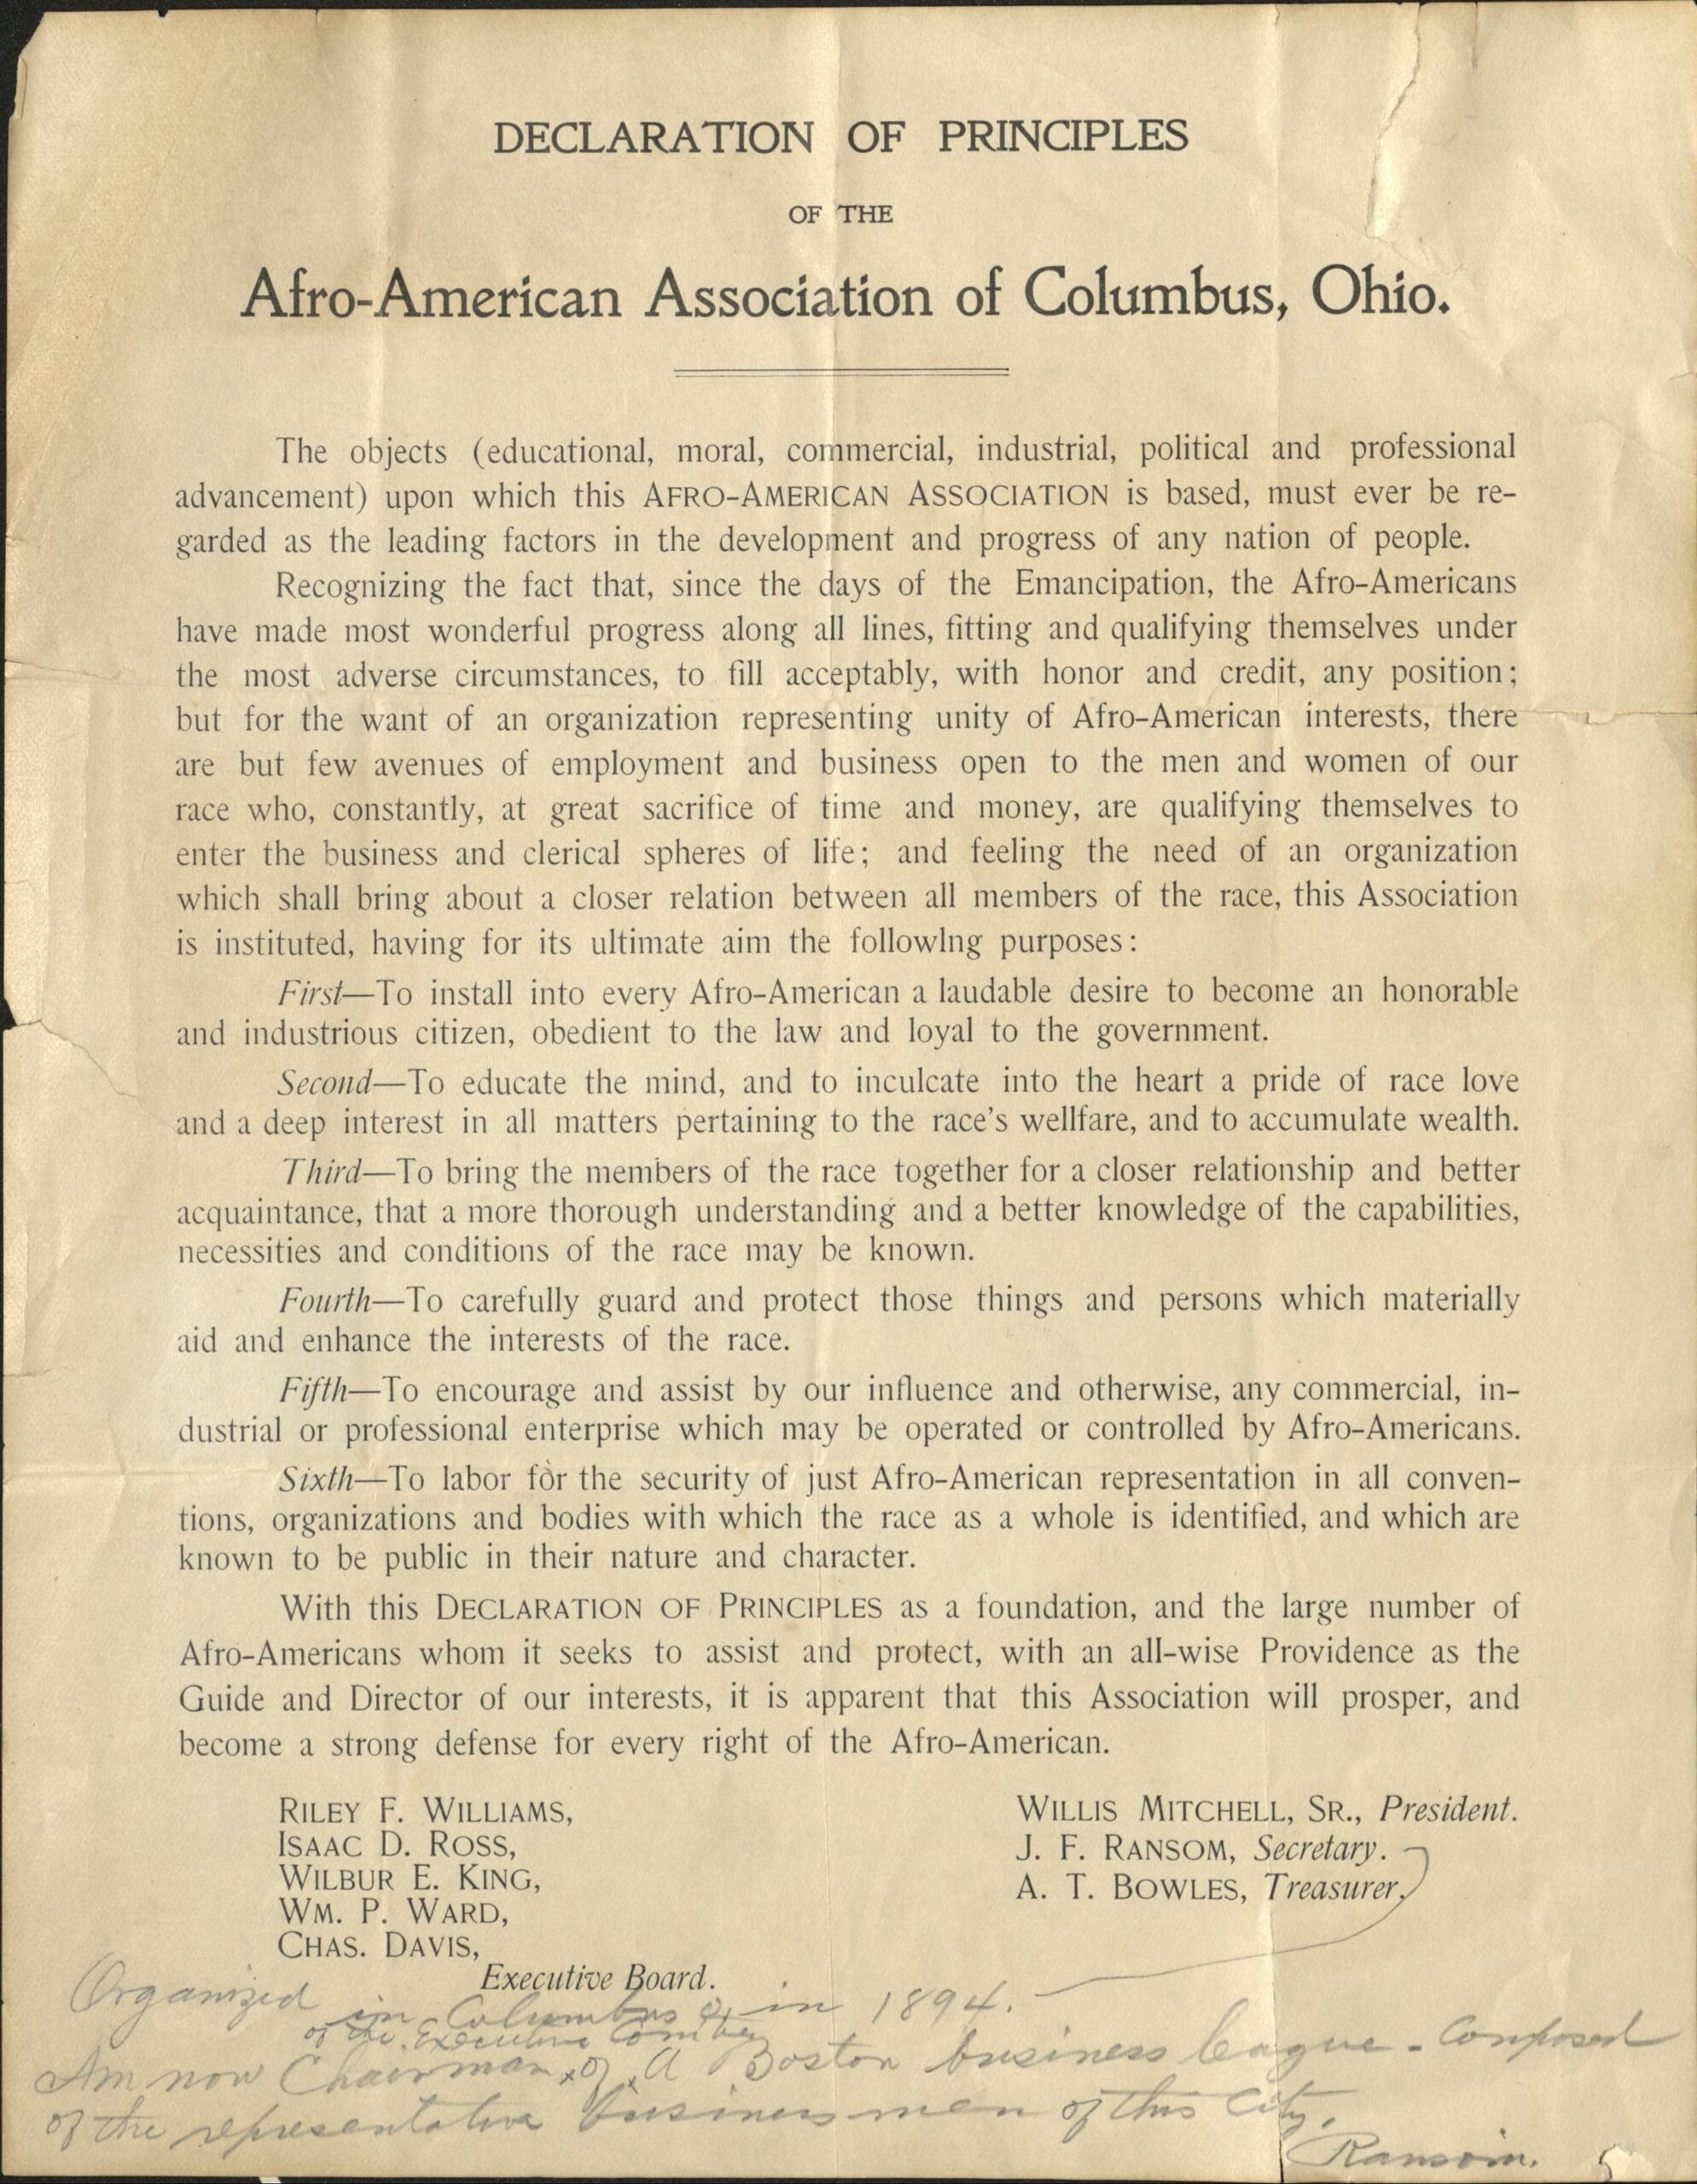 Declaration of Principles of the Afro-American Association of Columbus, Ohio